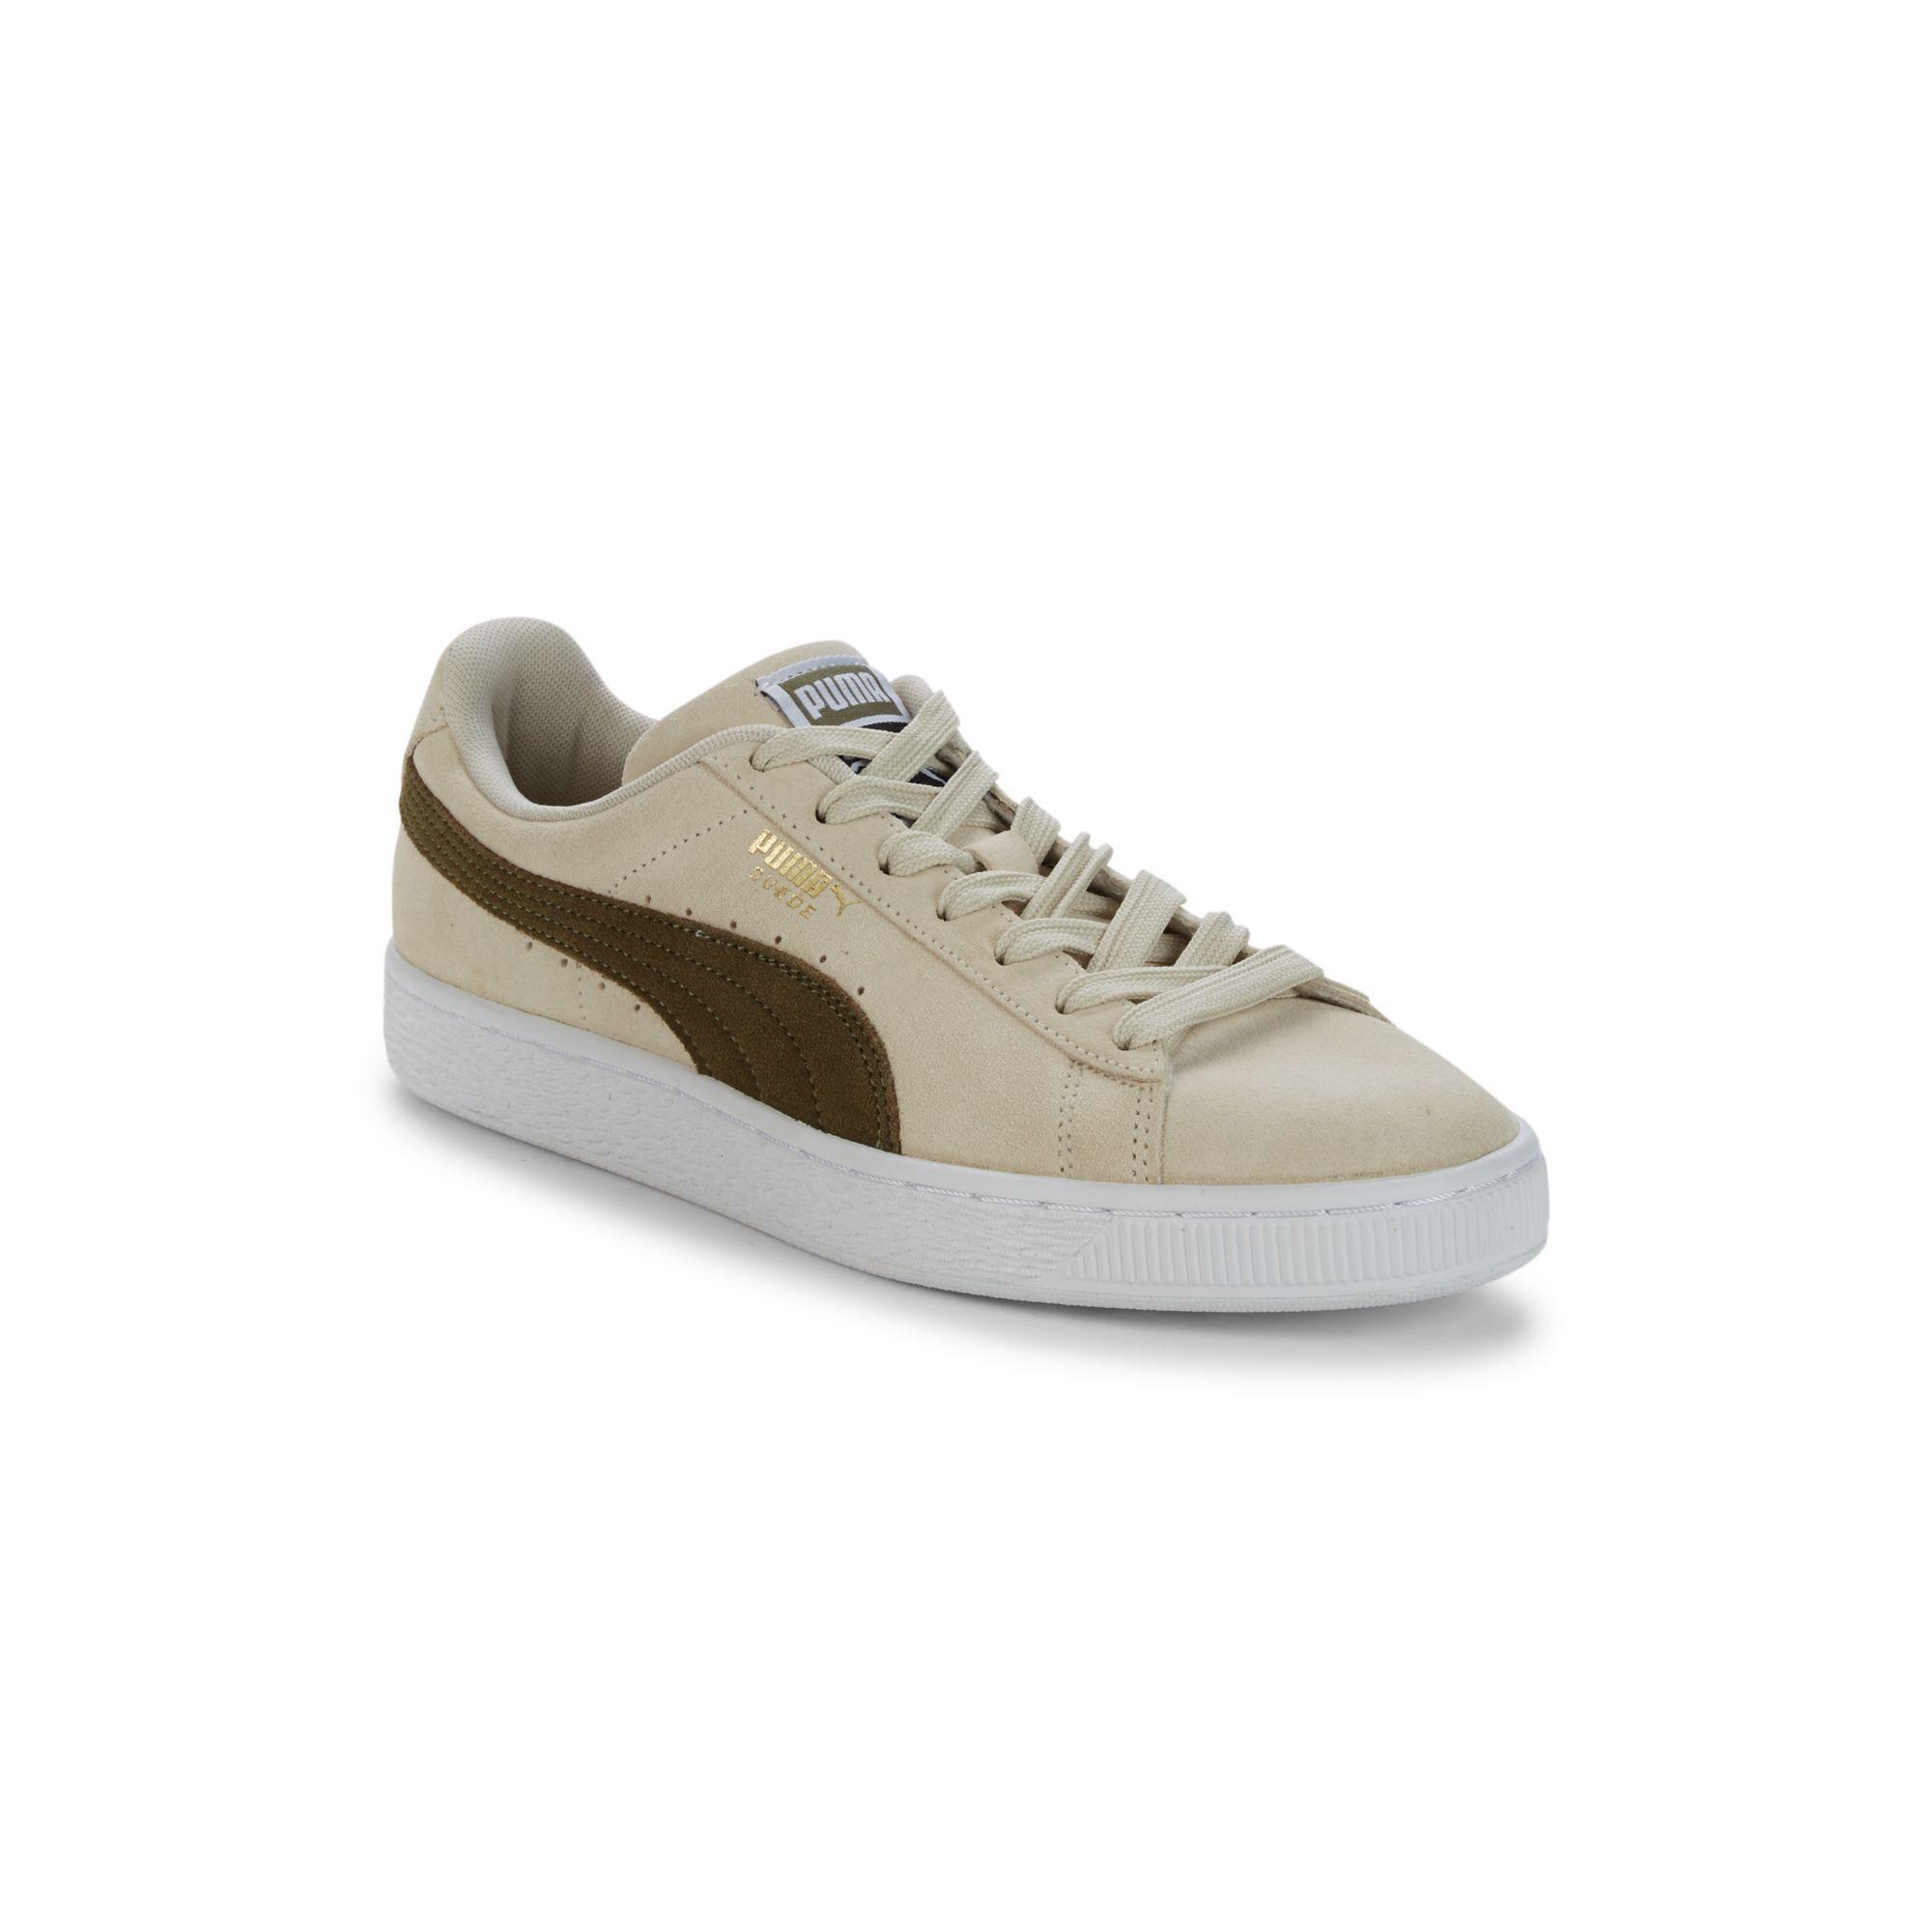 PUMA Low-cut Suede Sneakers in White for Men - Lyst